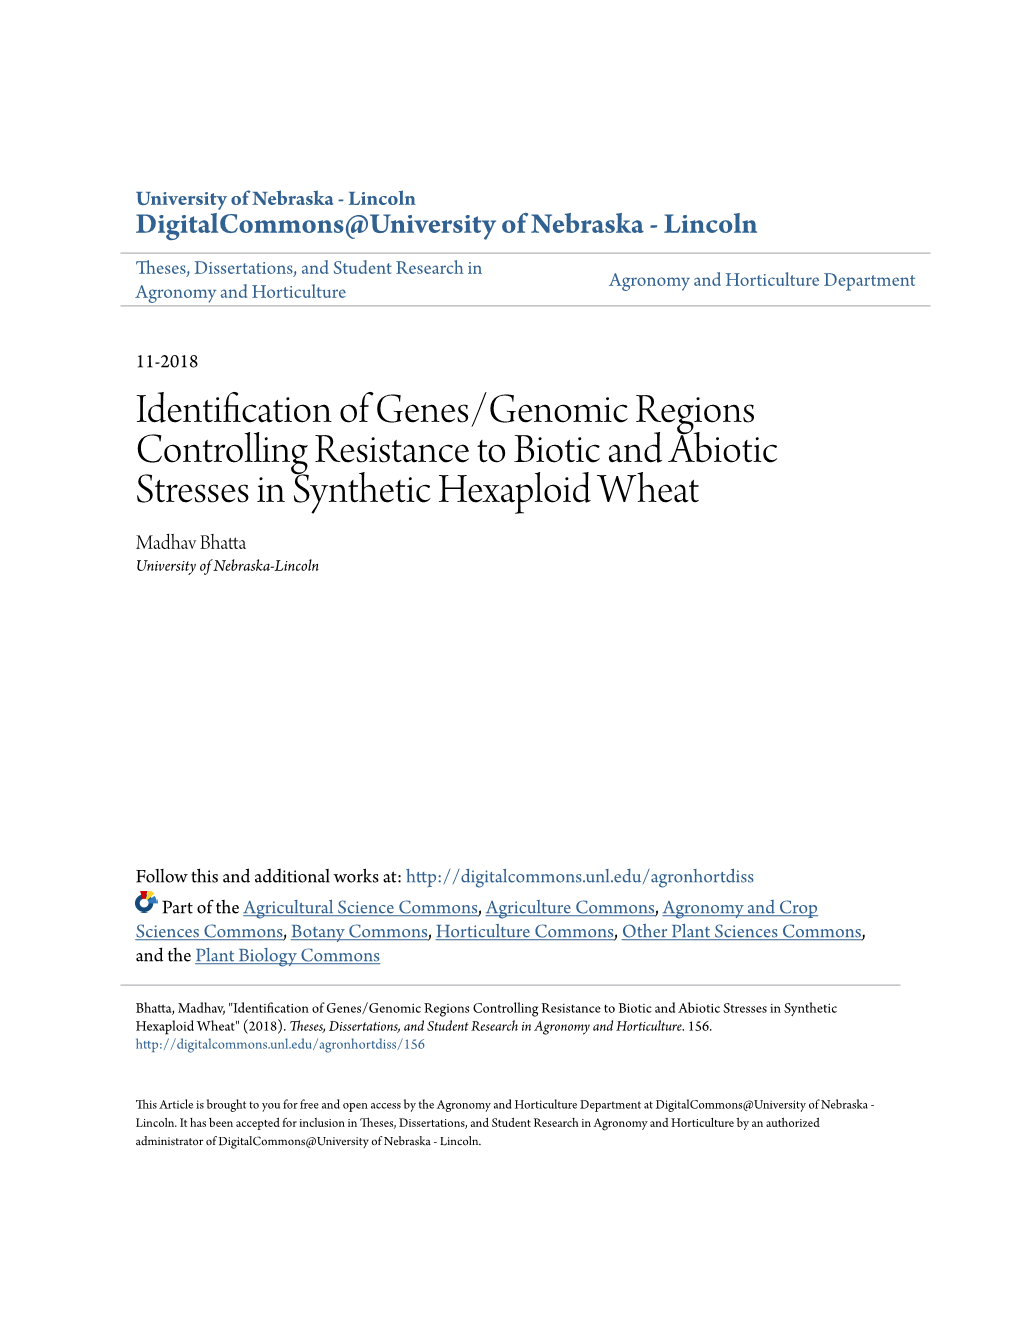 Identification of Genes/Genomic Regions Controlling Resistance to Biotic and Abiotic Stresses in Synthetic Hexaploid Wheat